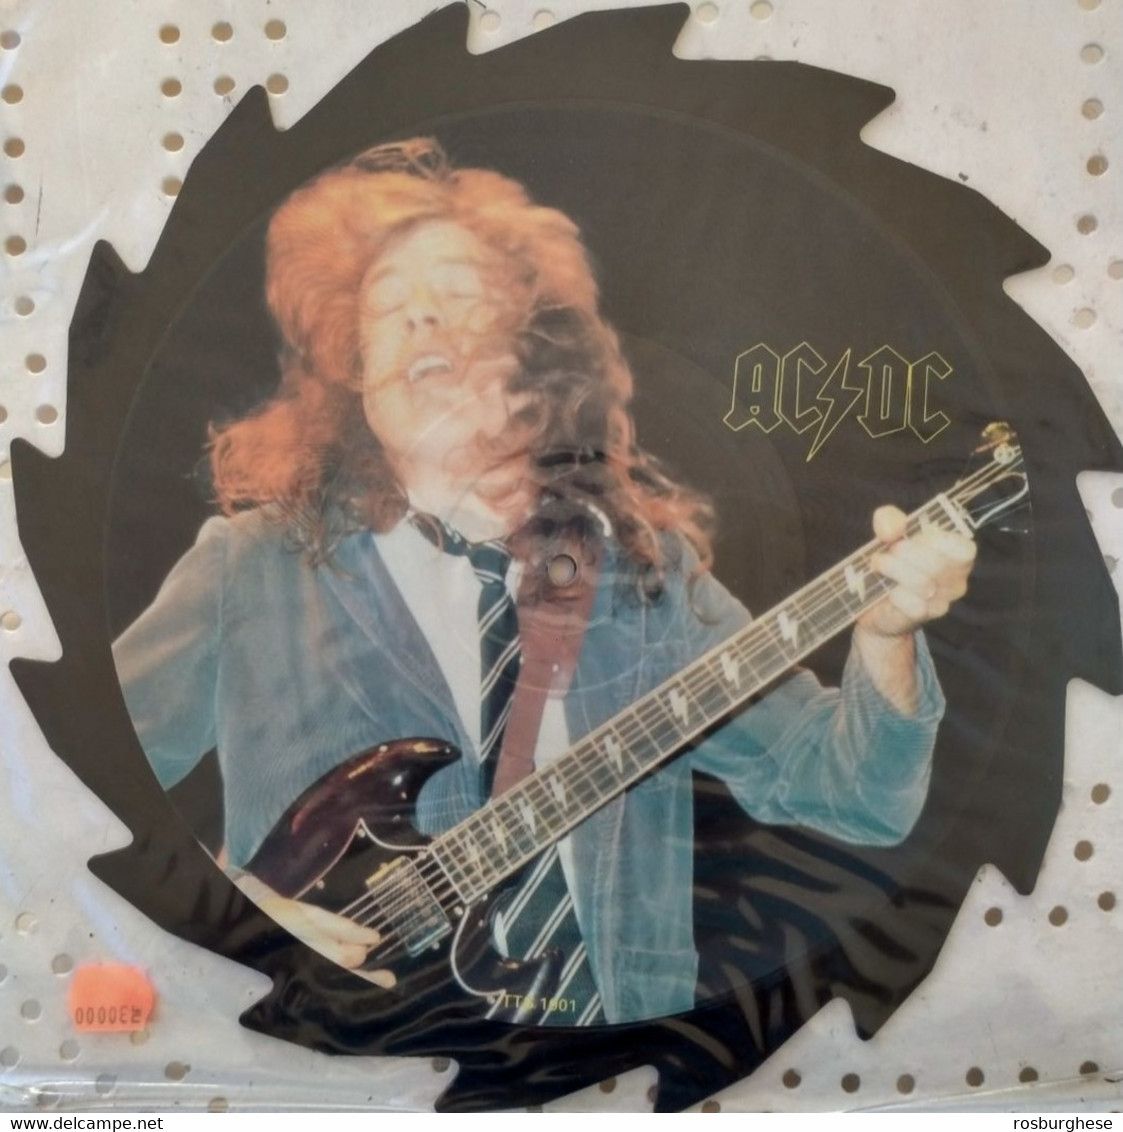 AC/DC Limited Edition Interview Picture Disc 12" Vinile SAGOMATO SHAPE A Forma Di Lama NUOVO - Editions Limitées